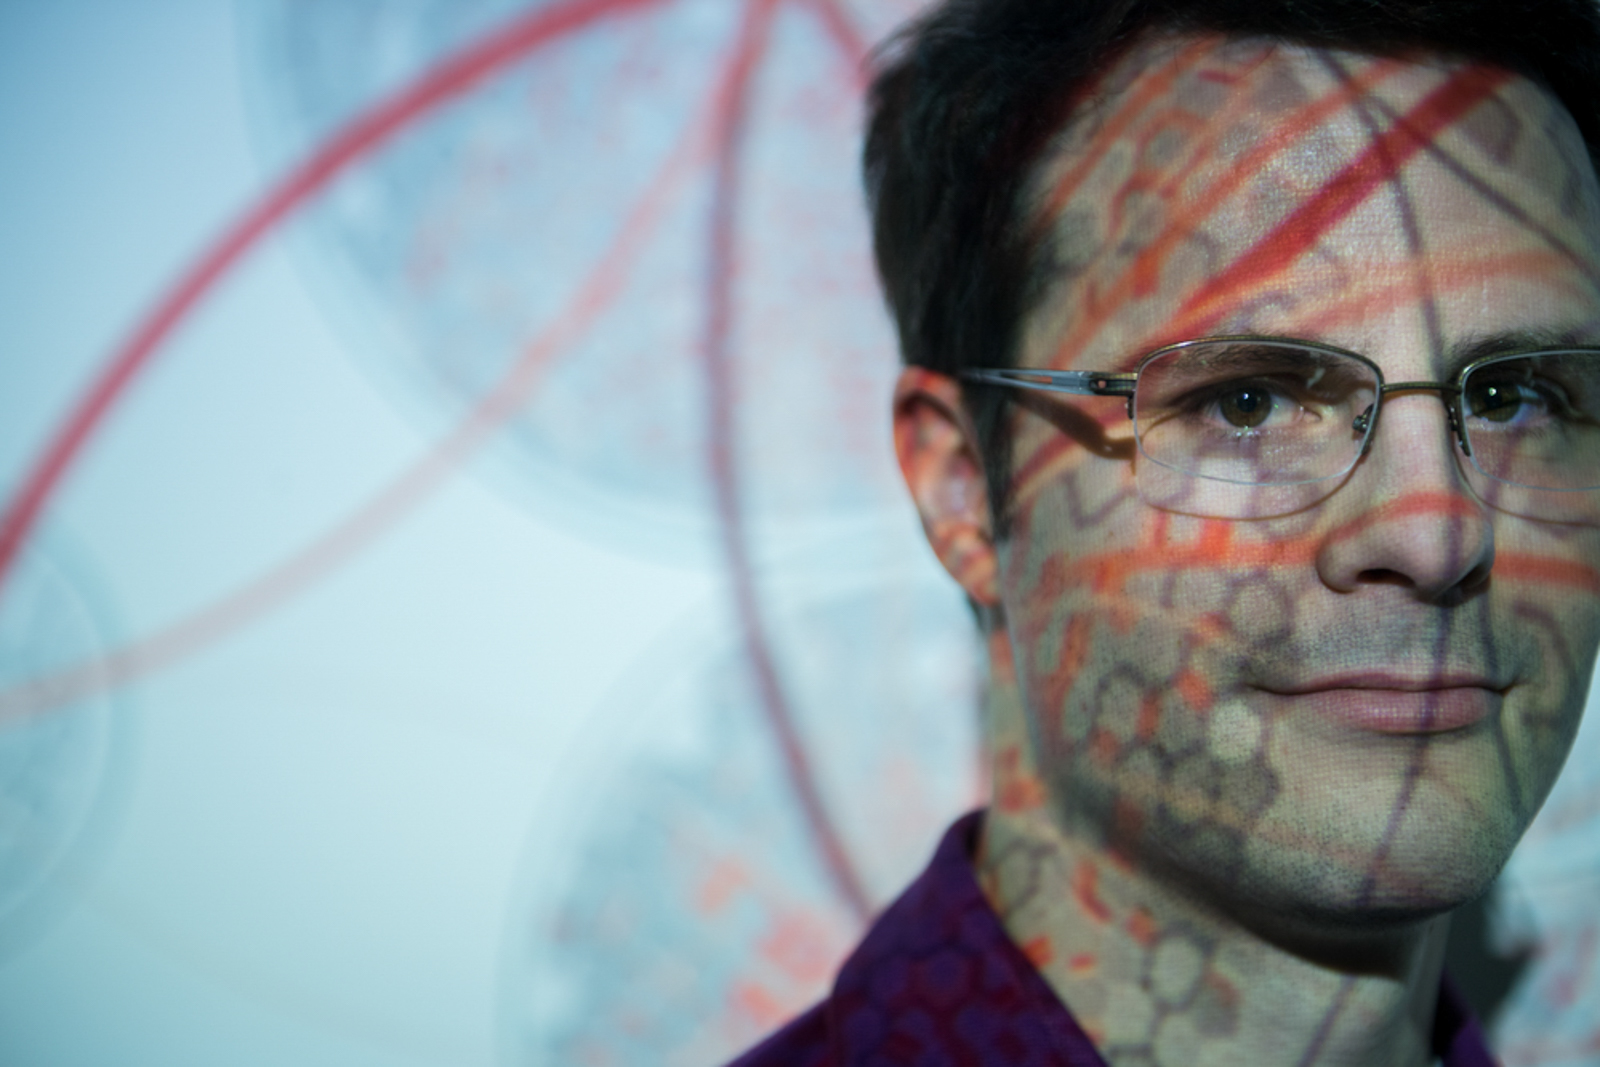 Close up of man wearing glasses with pattern projected over his face